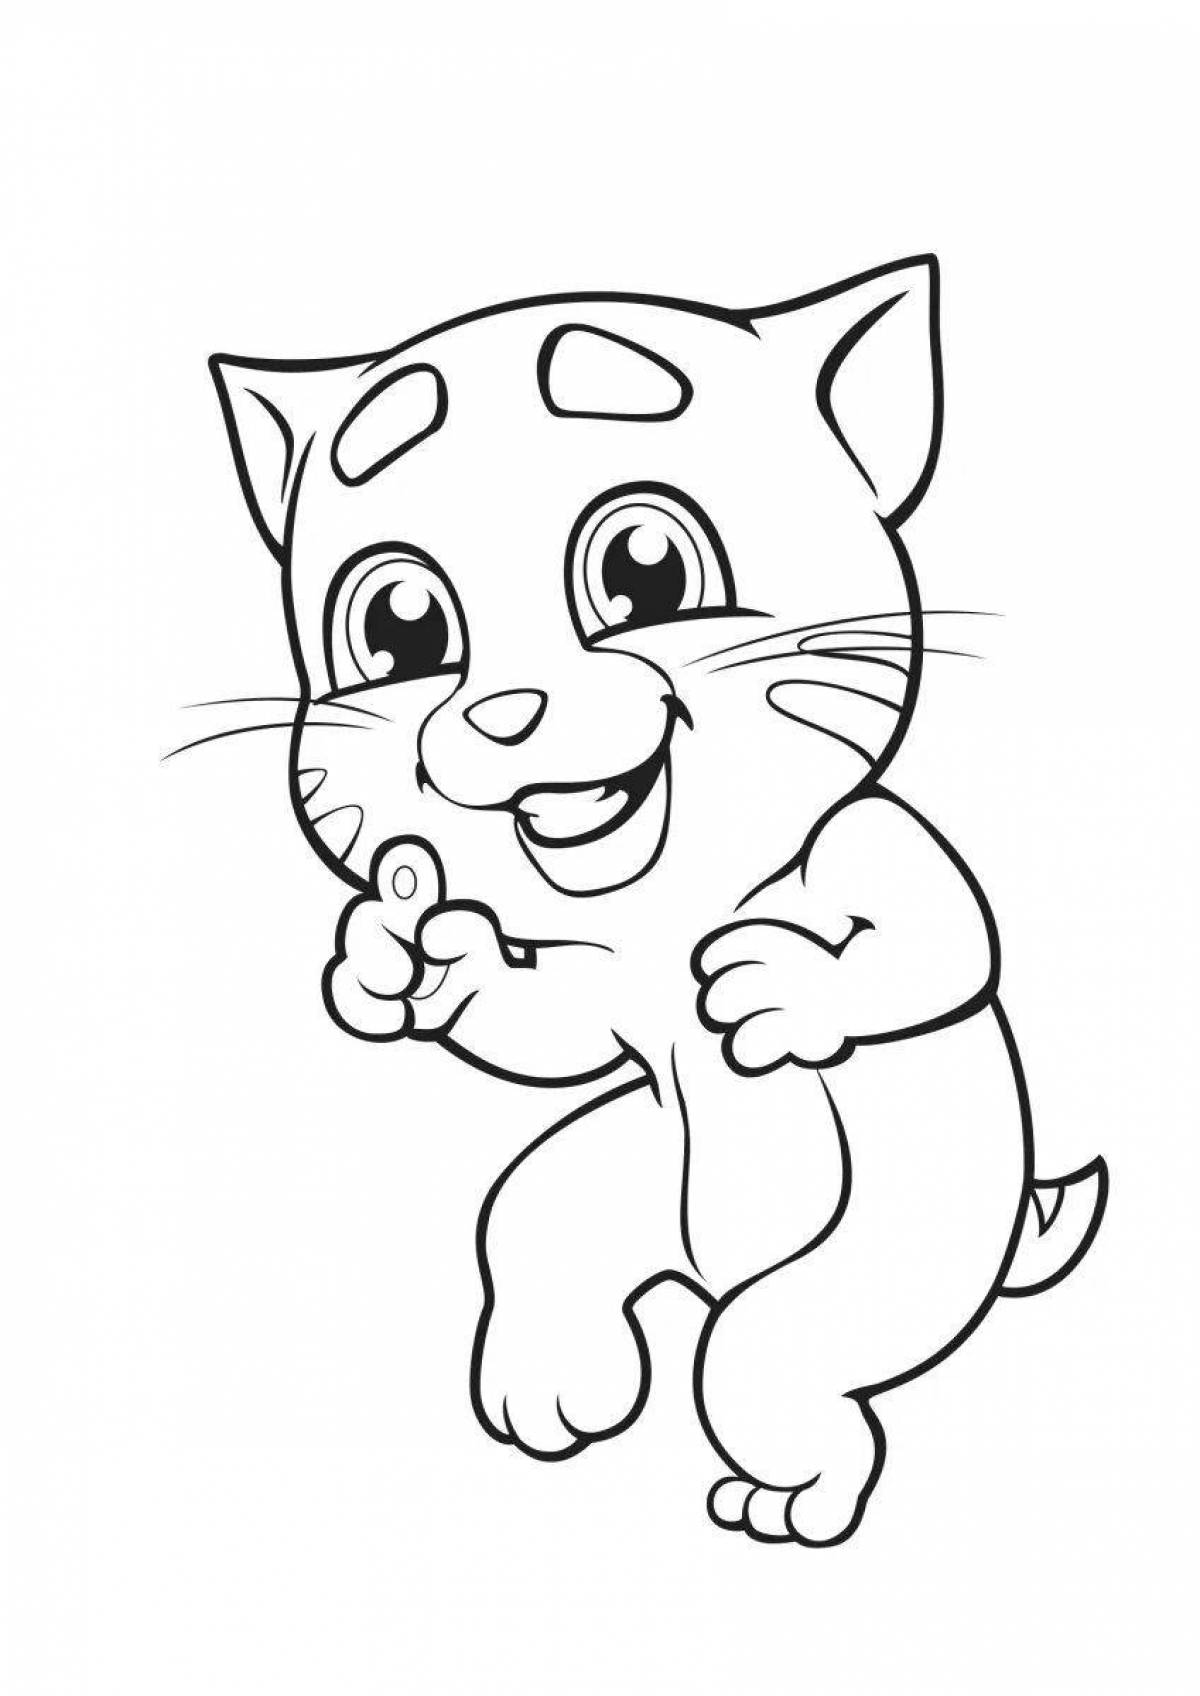 Adorable angela cat coloring page